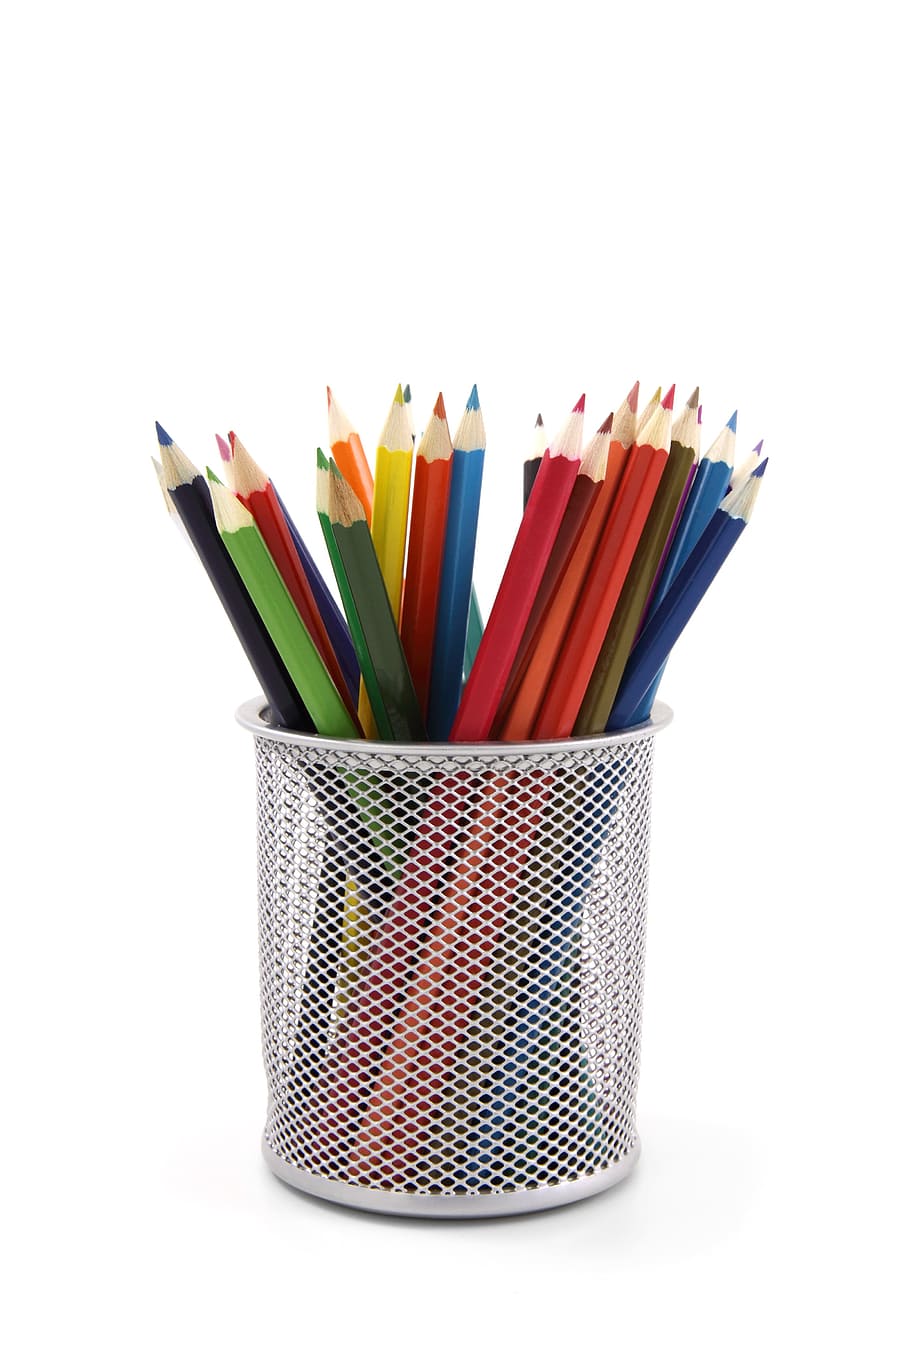 assorted, coloring pencils, gray, pencil holder, color pencils, white, mesh, container, artistic, bright